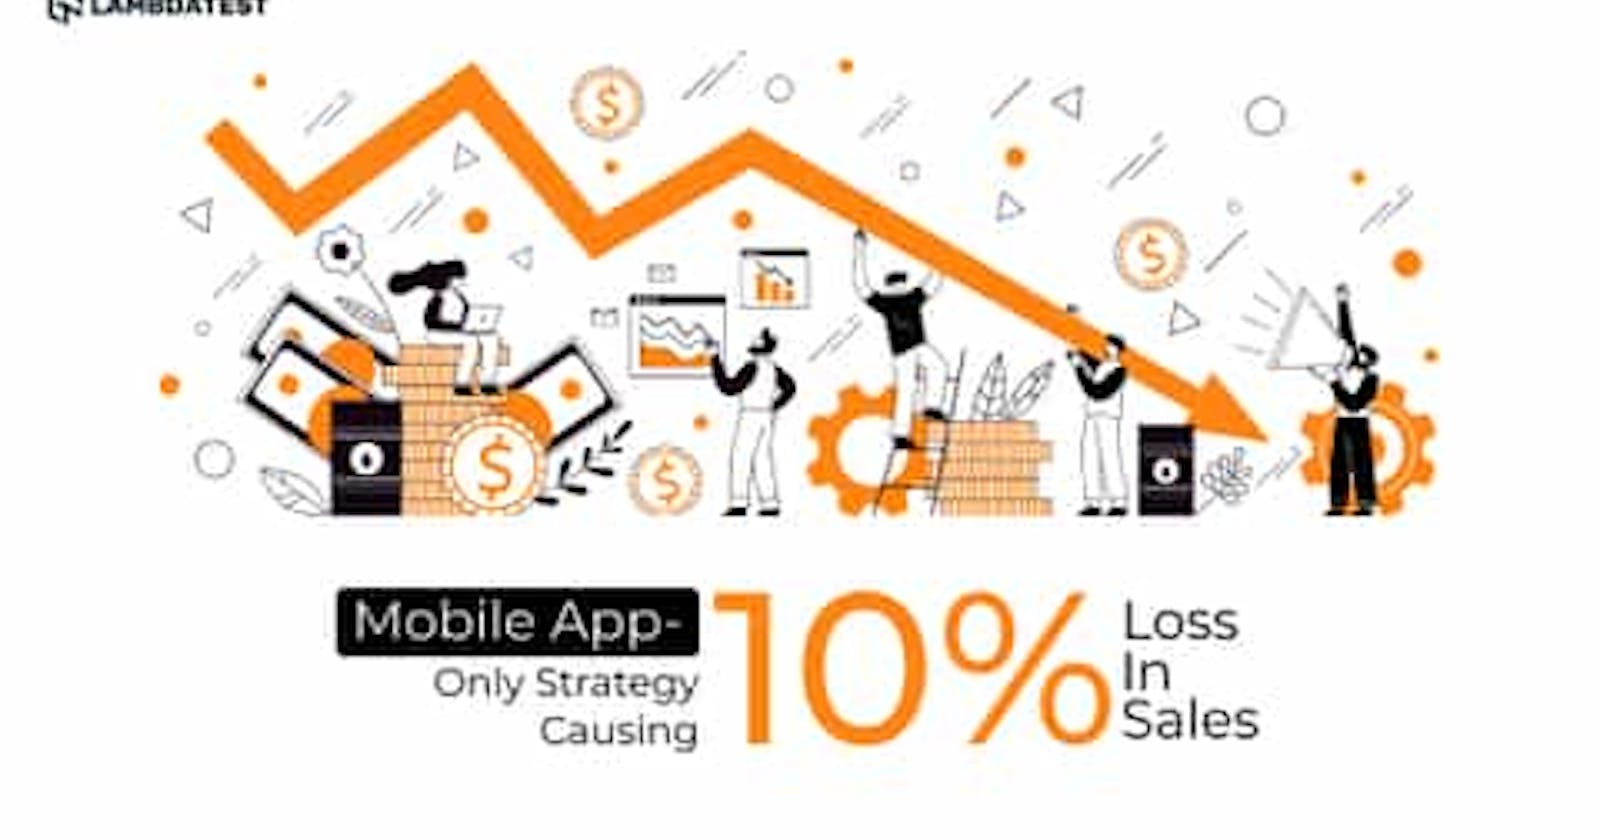 Mobile App-Only Approach Causing 10% Loss In Sales